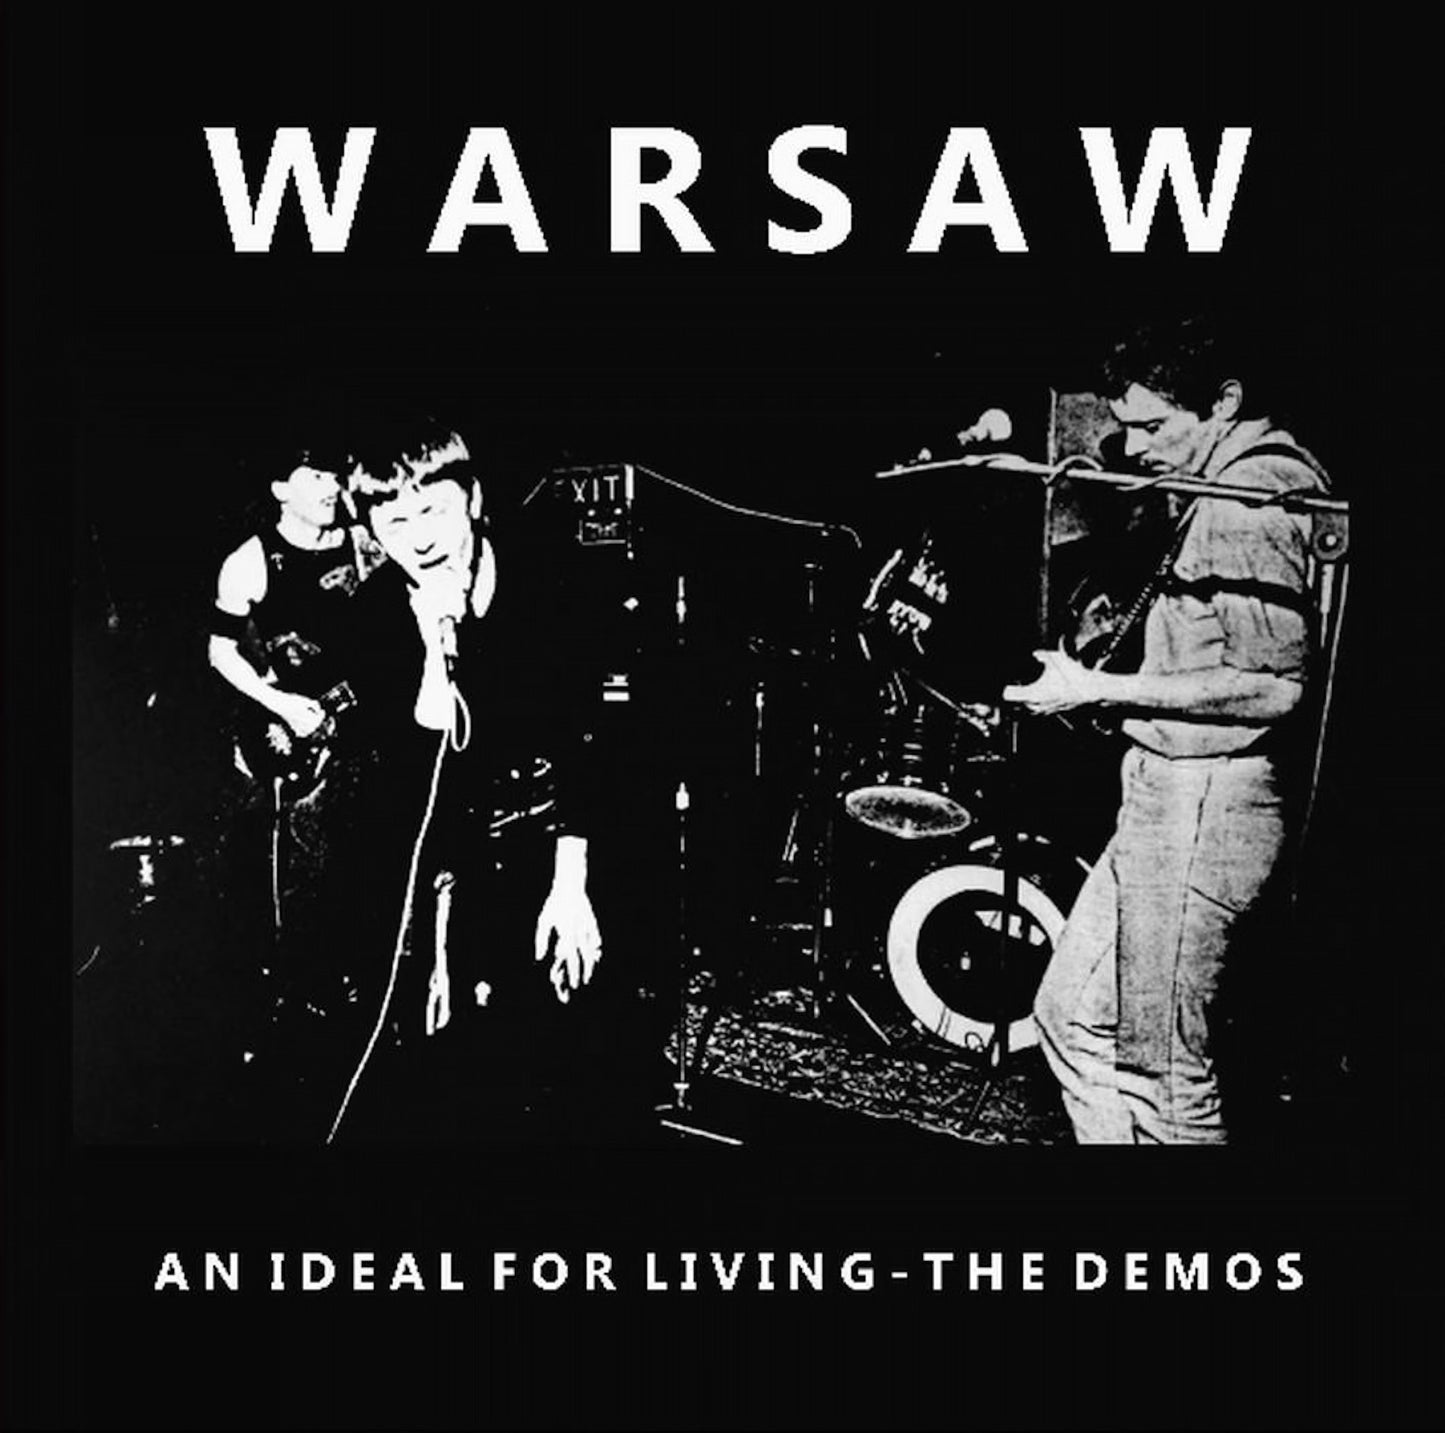 WARSAW – An Ideal For Living Demos LP